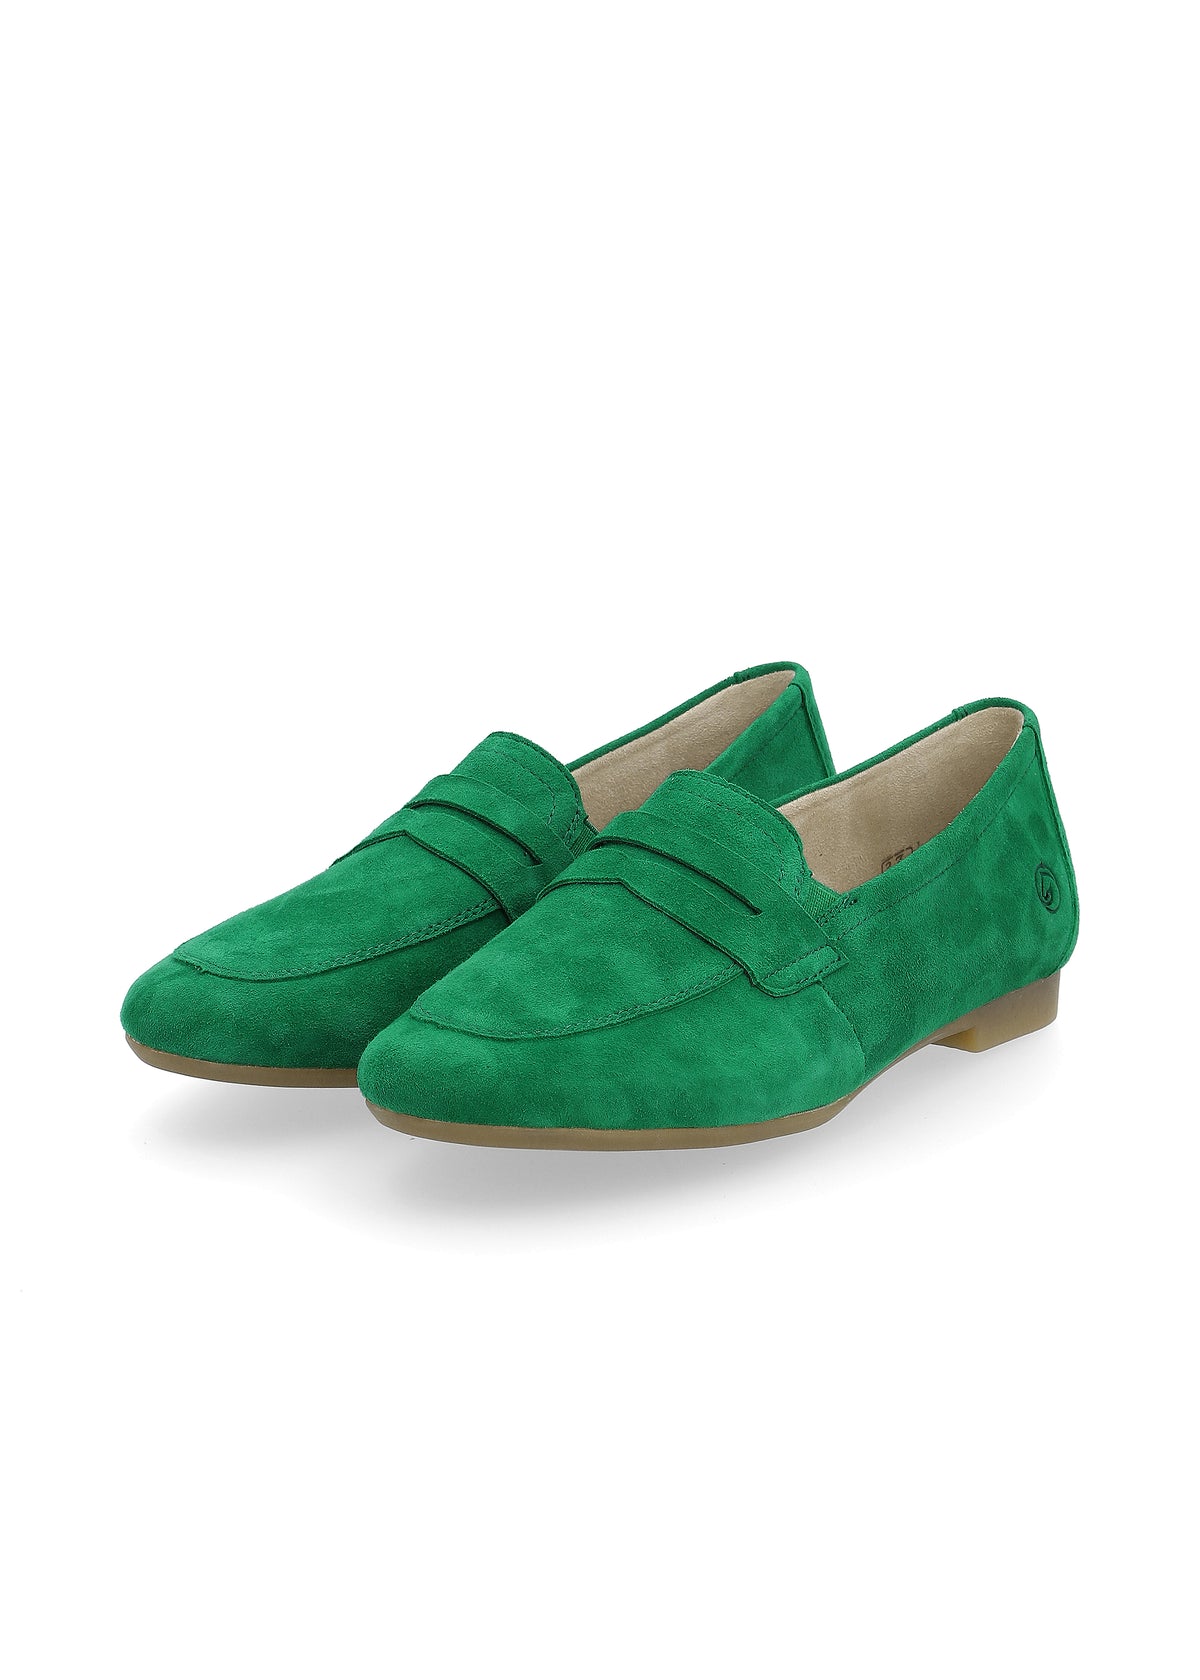 Loafers - green suede leather, loafer strap as decoration